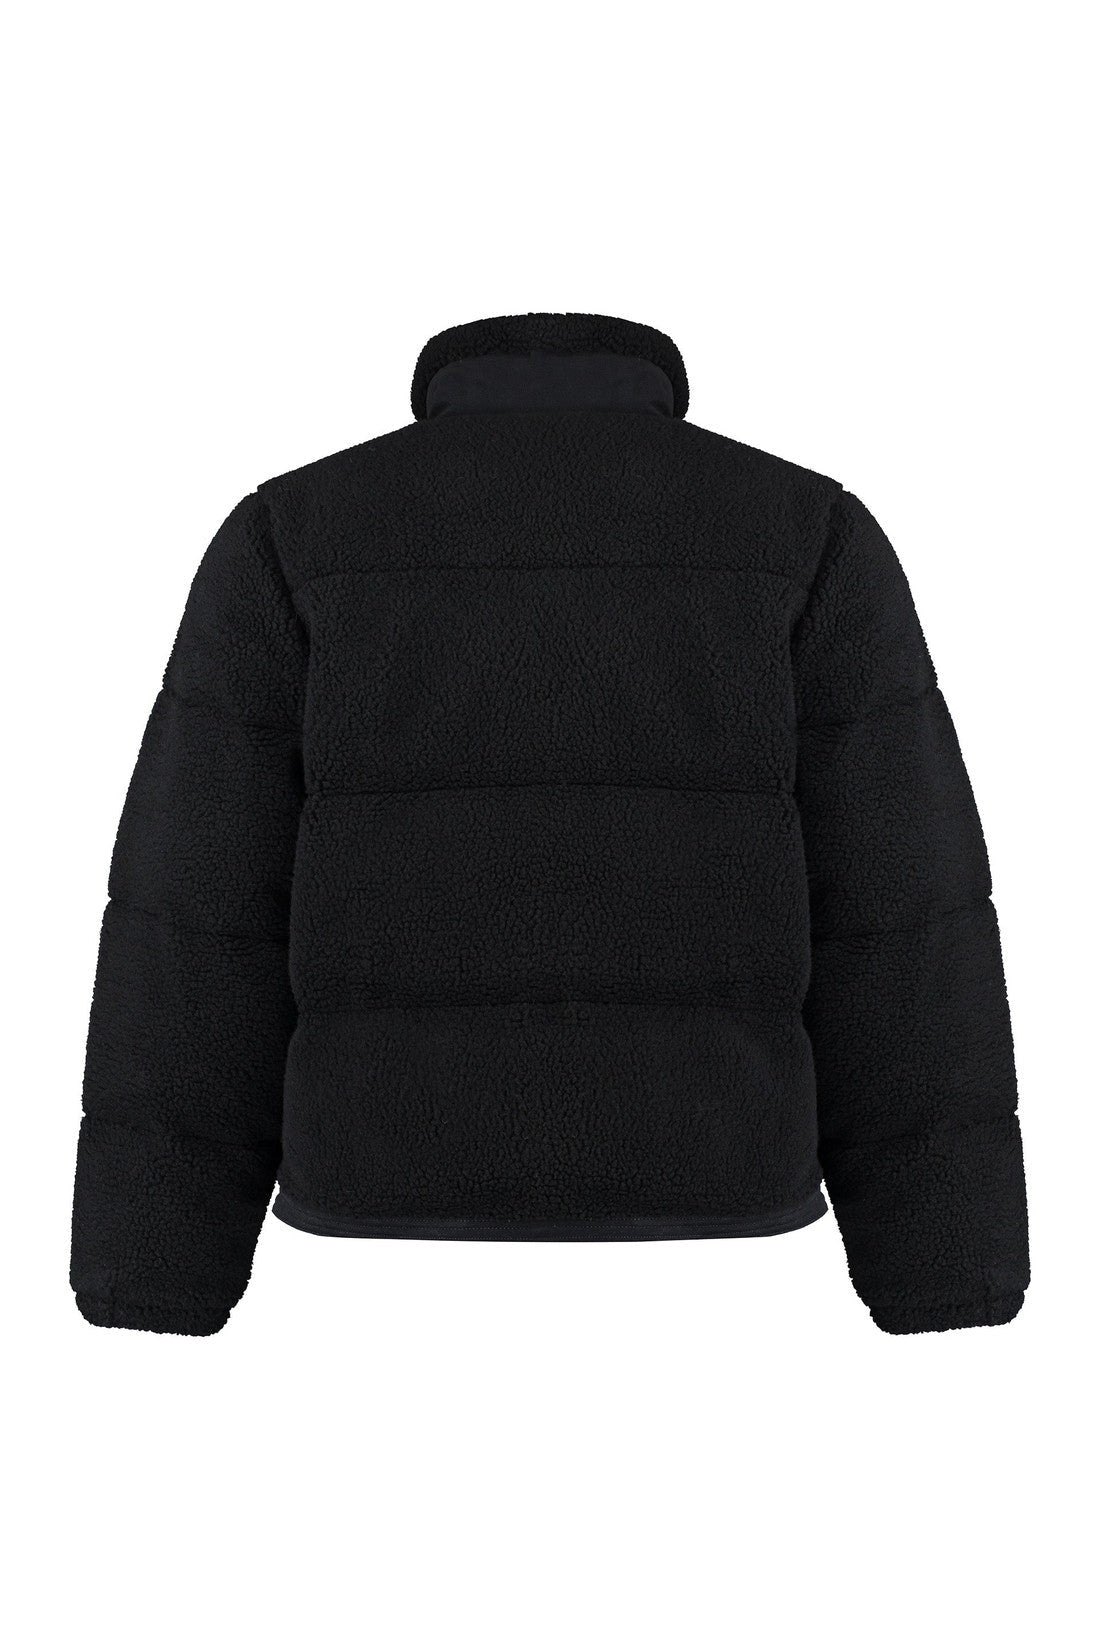 Dickies-OUTLET-SALE-Mount Hope techno fabric down jacket-ARCHIVIST